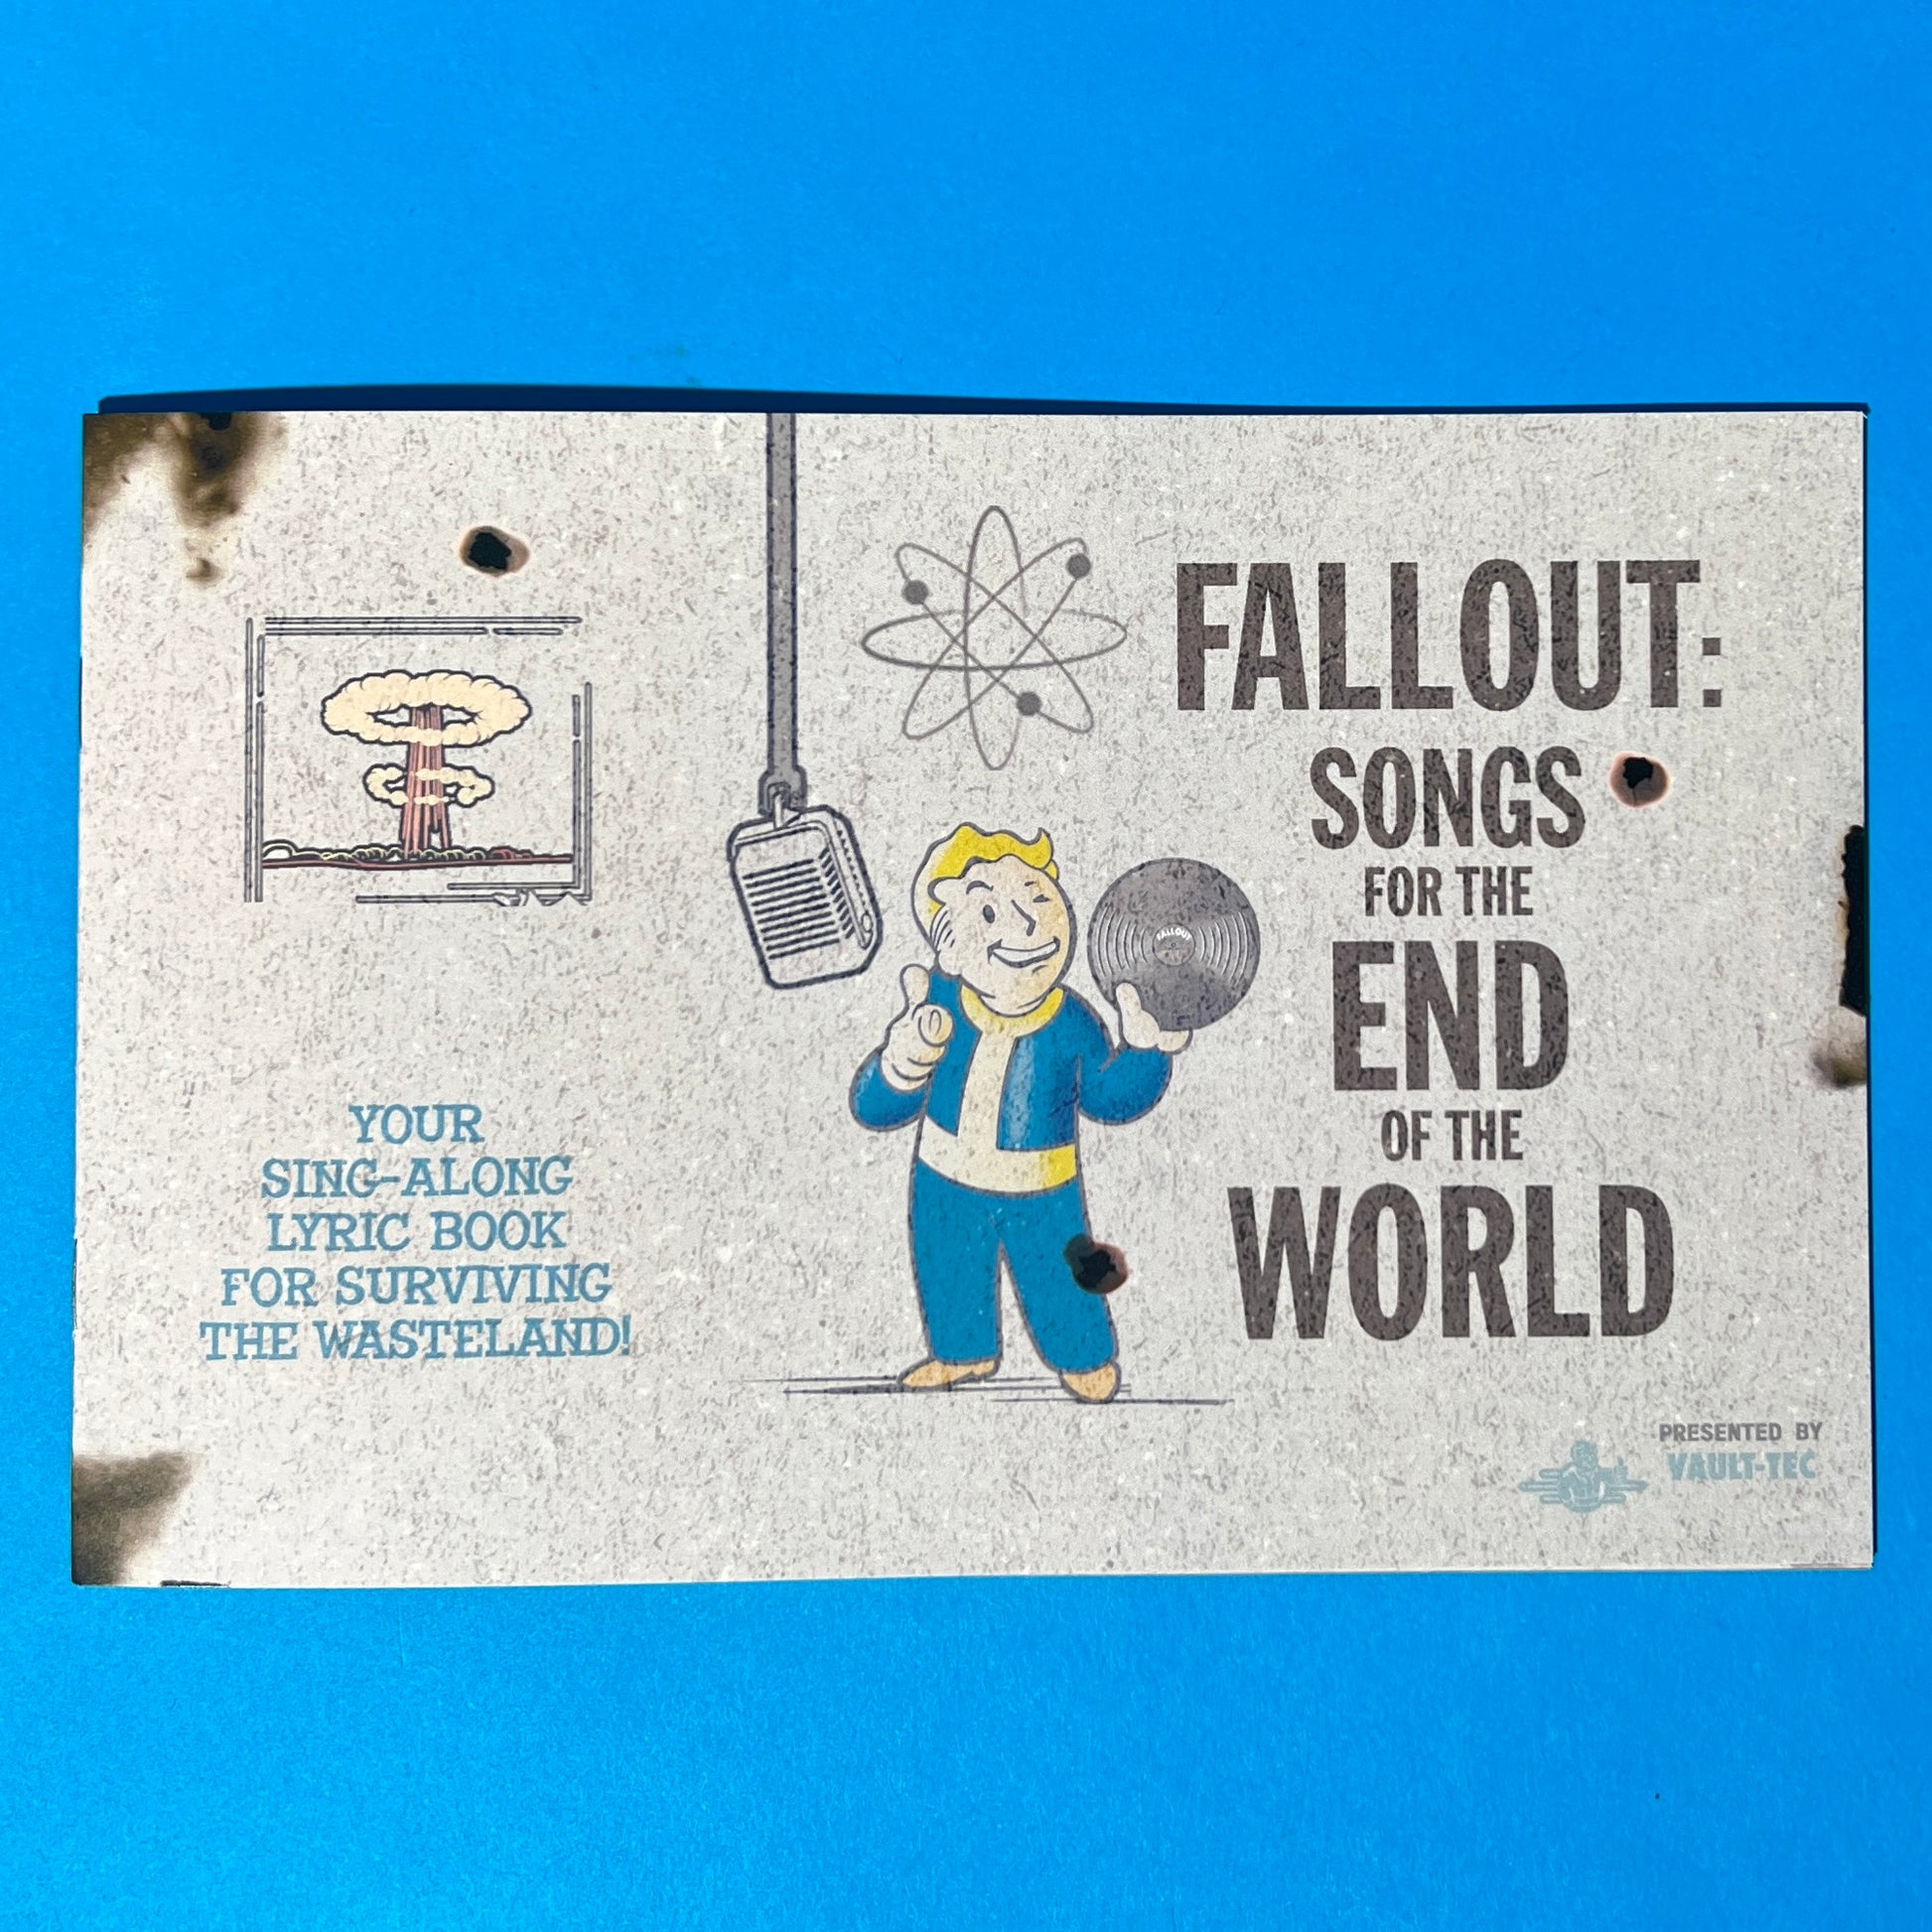 Unboxing Fallout: songs for the end of the world. This is a record